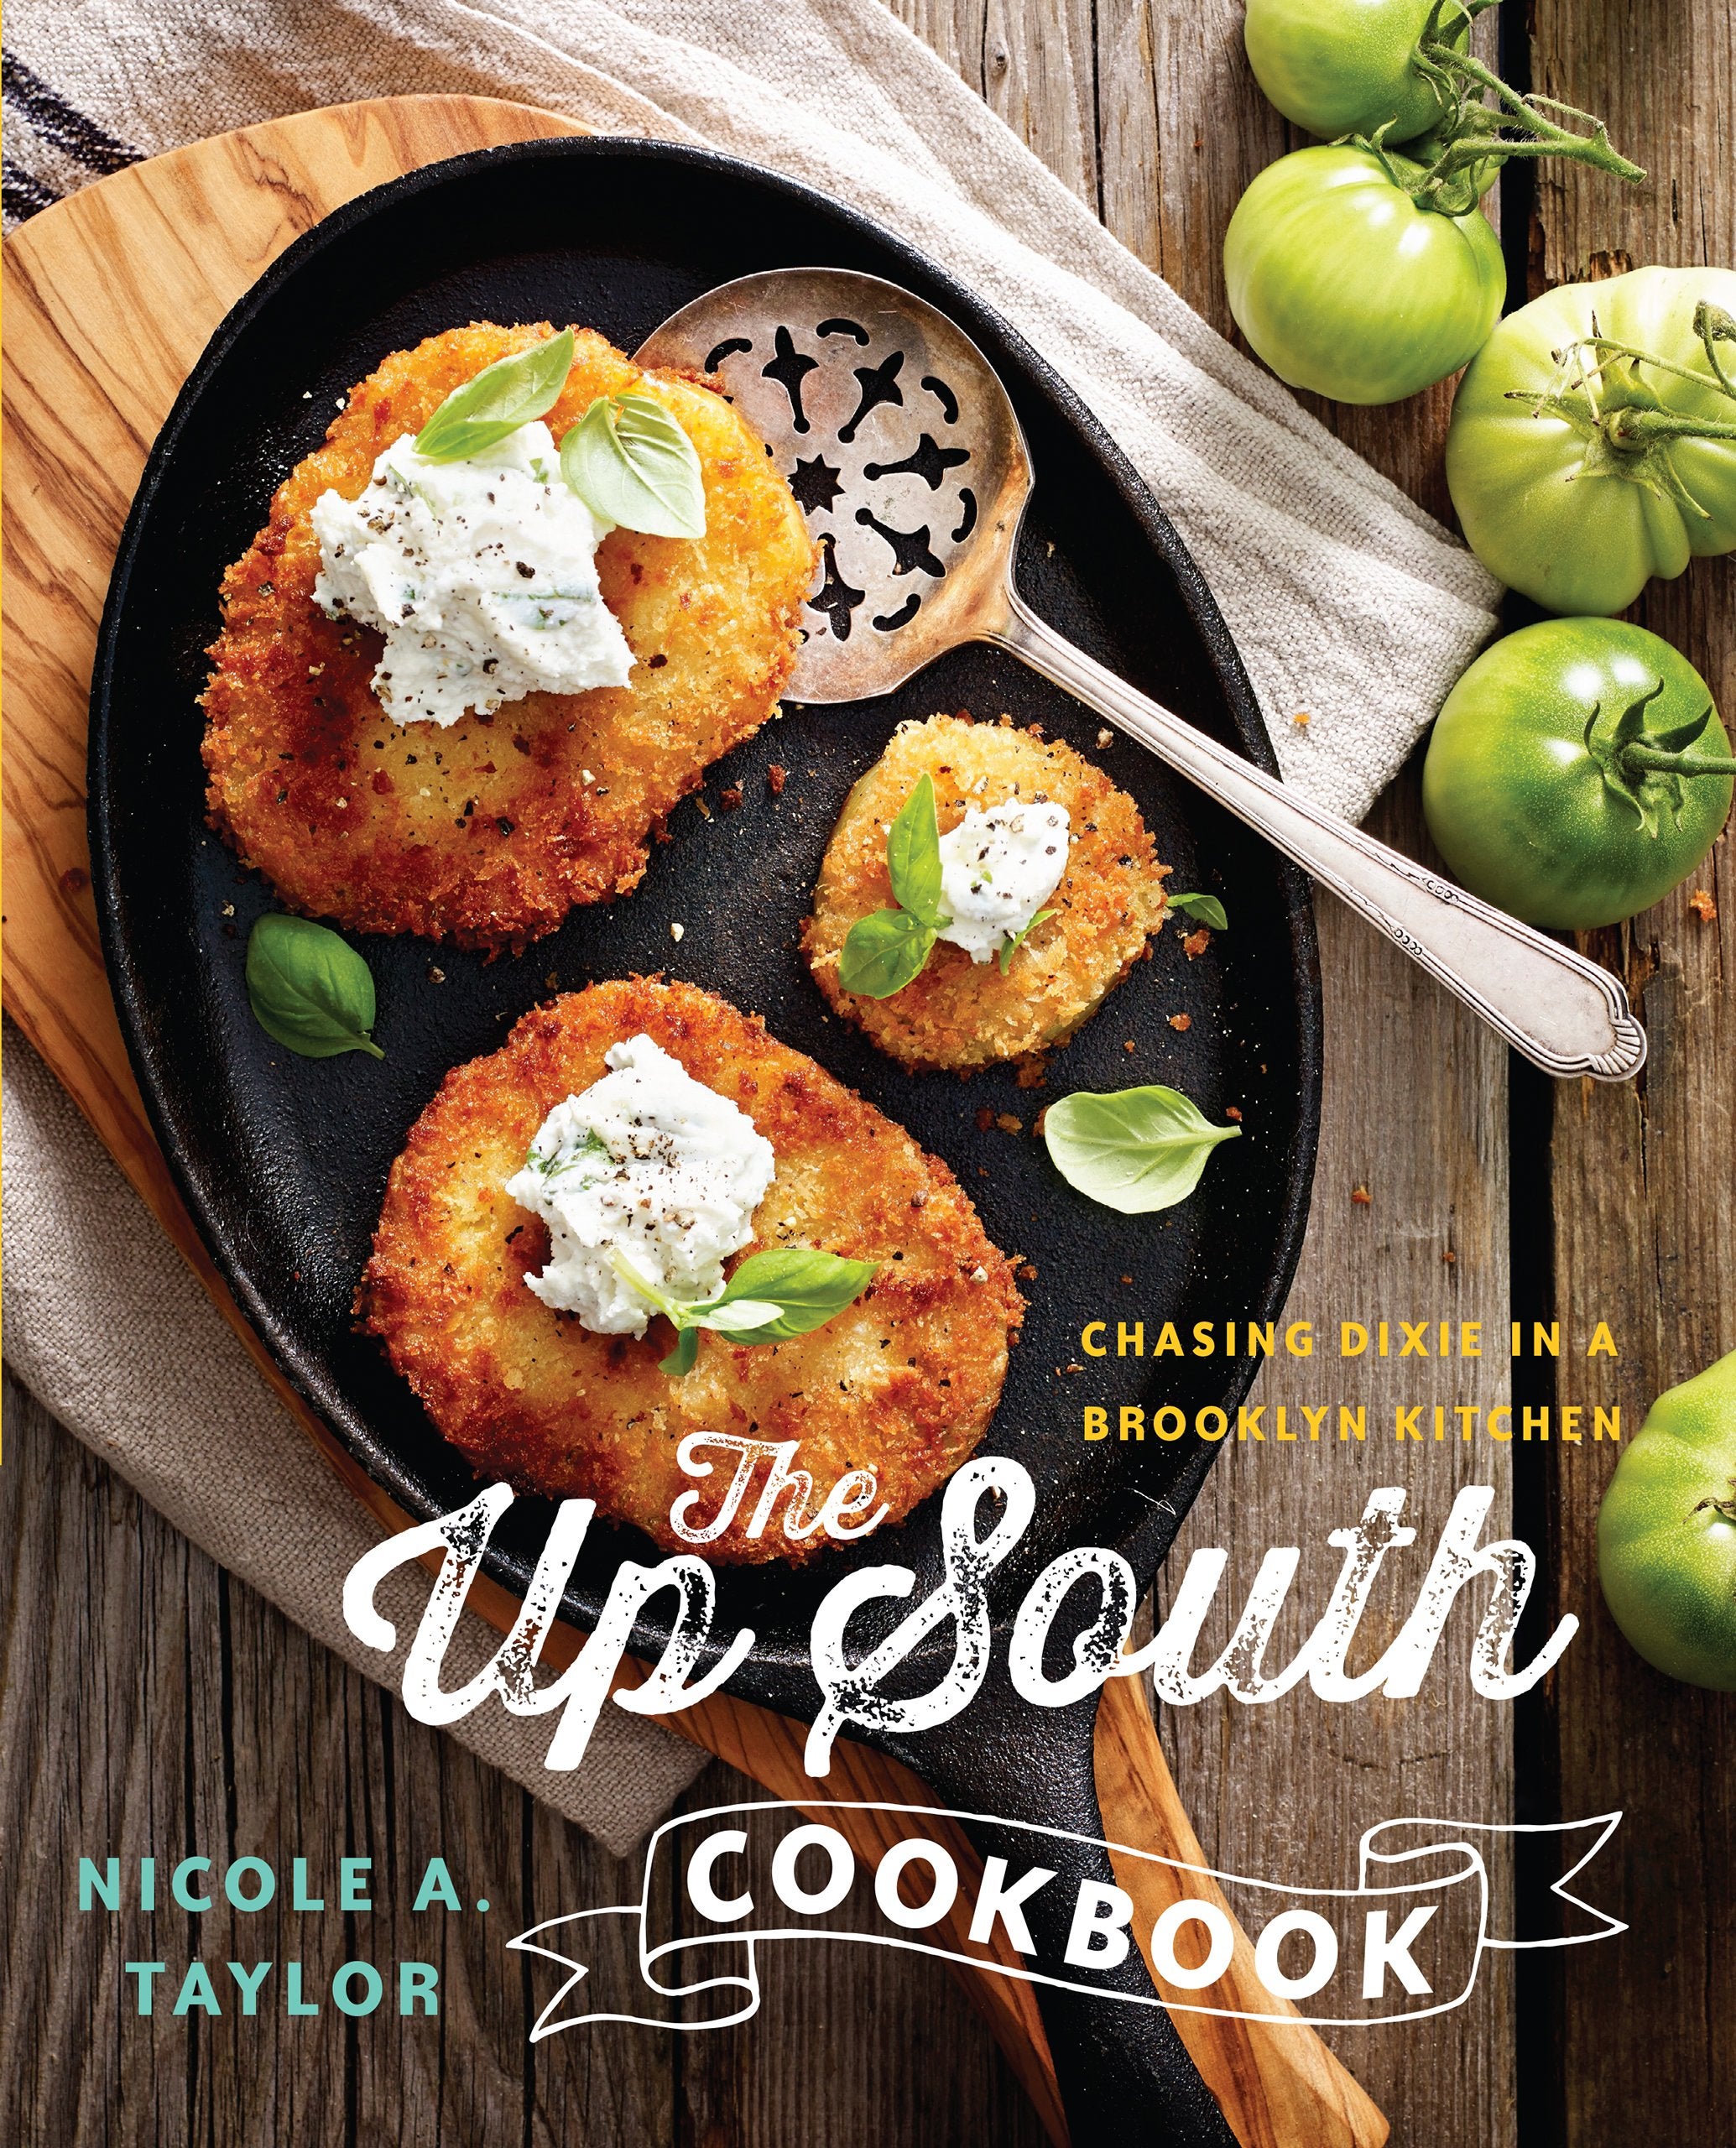 10 Current Cookbooks That Will Upgrade Your Kitchen Game